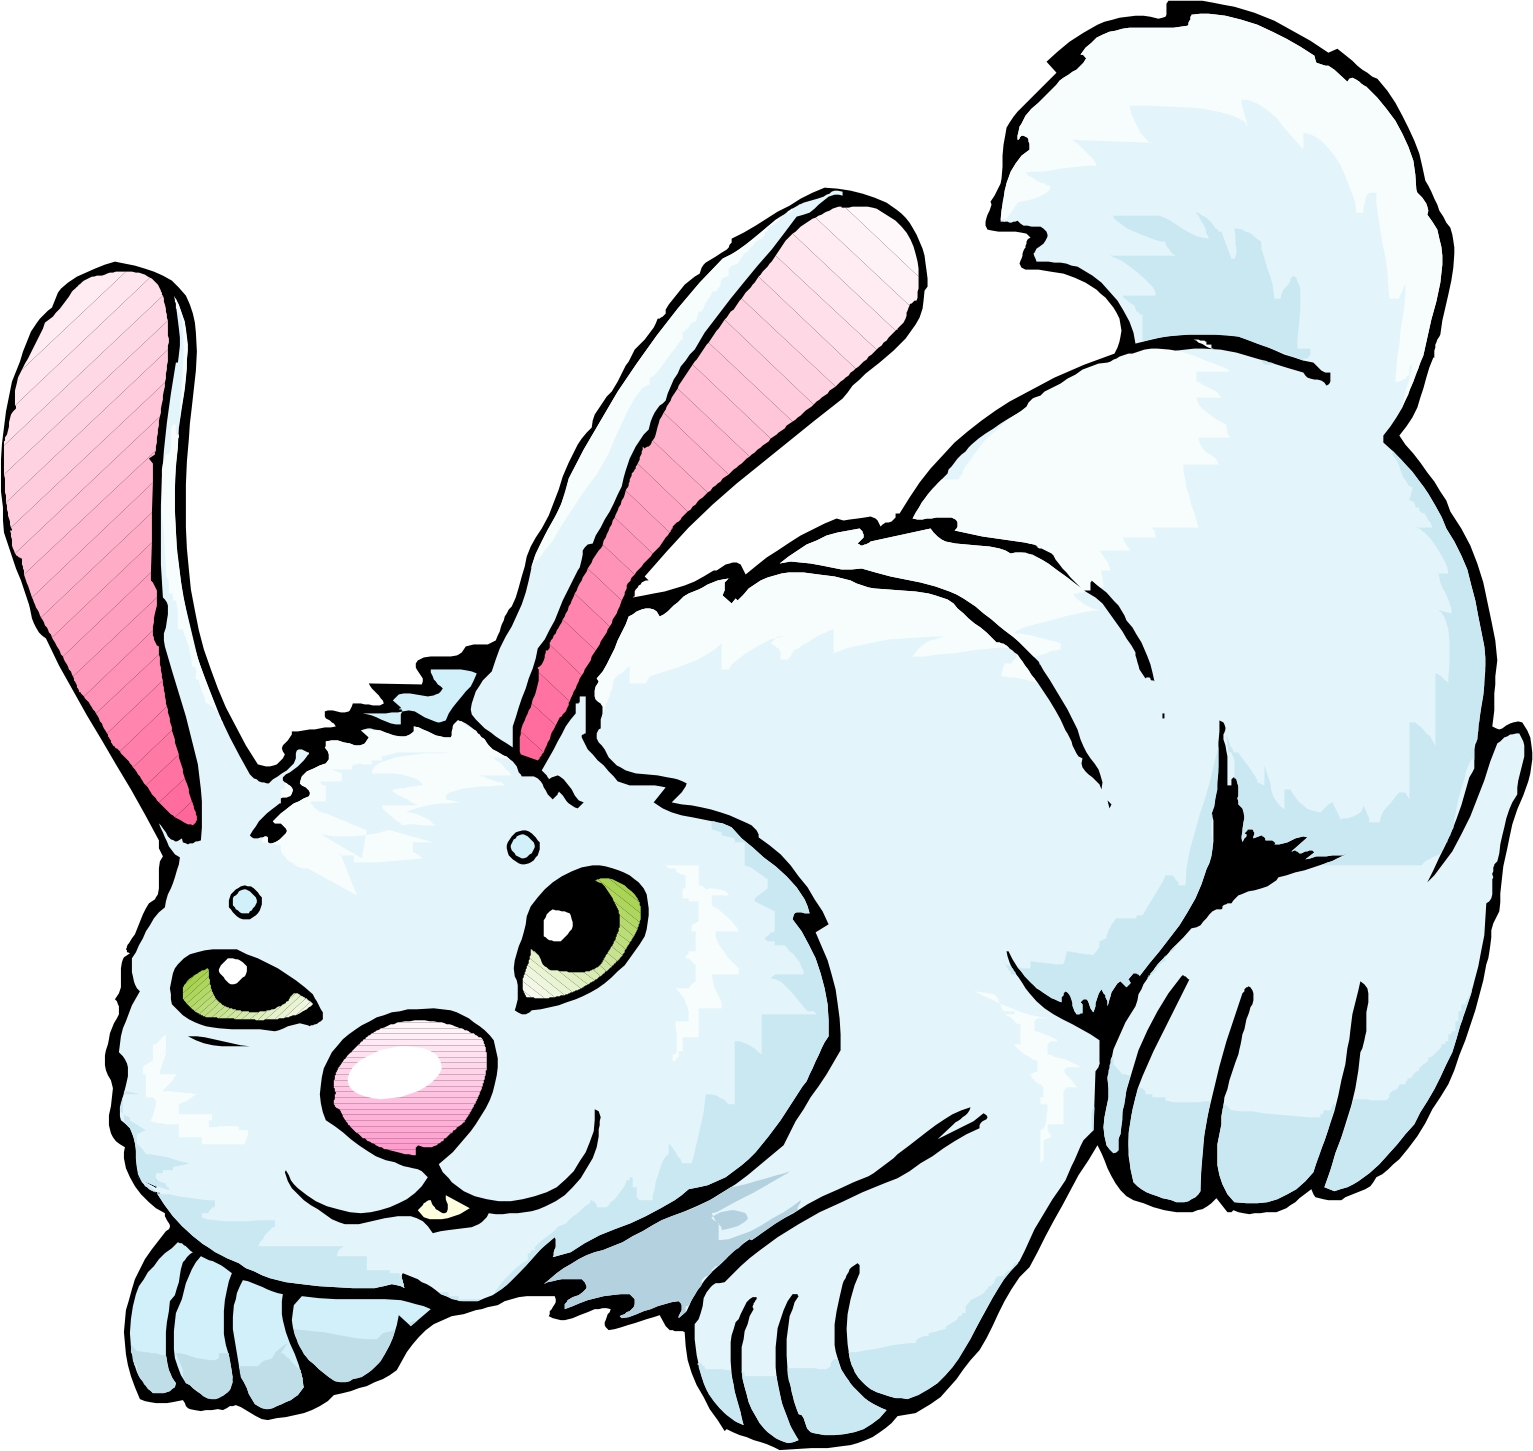 Cute Rabbit Cartoon Drawing Images Pictures Becuo - Litle Pups